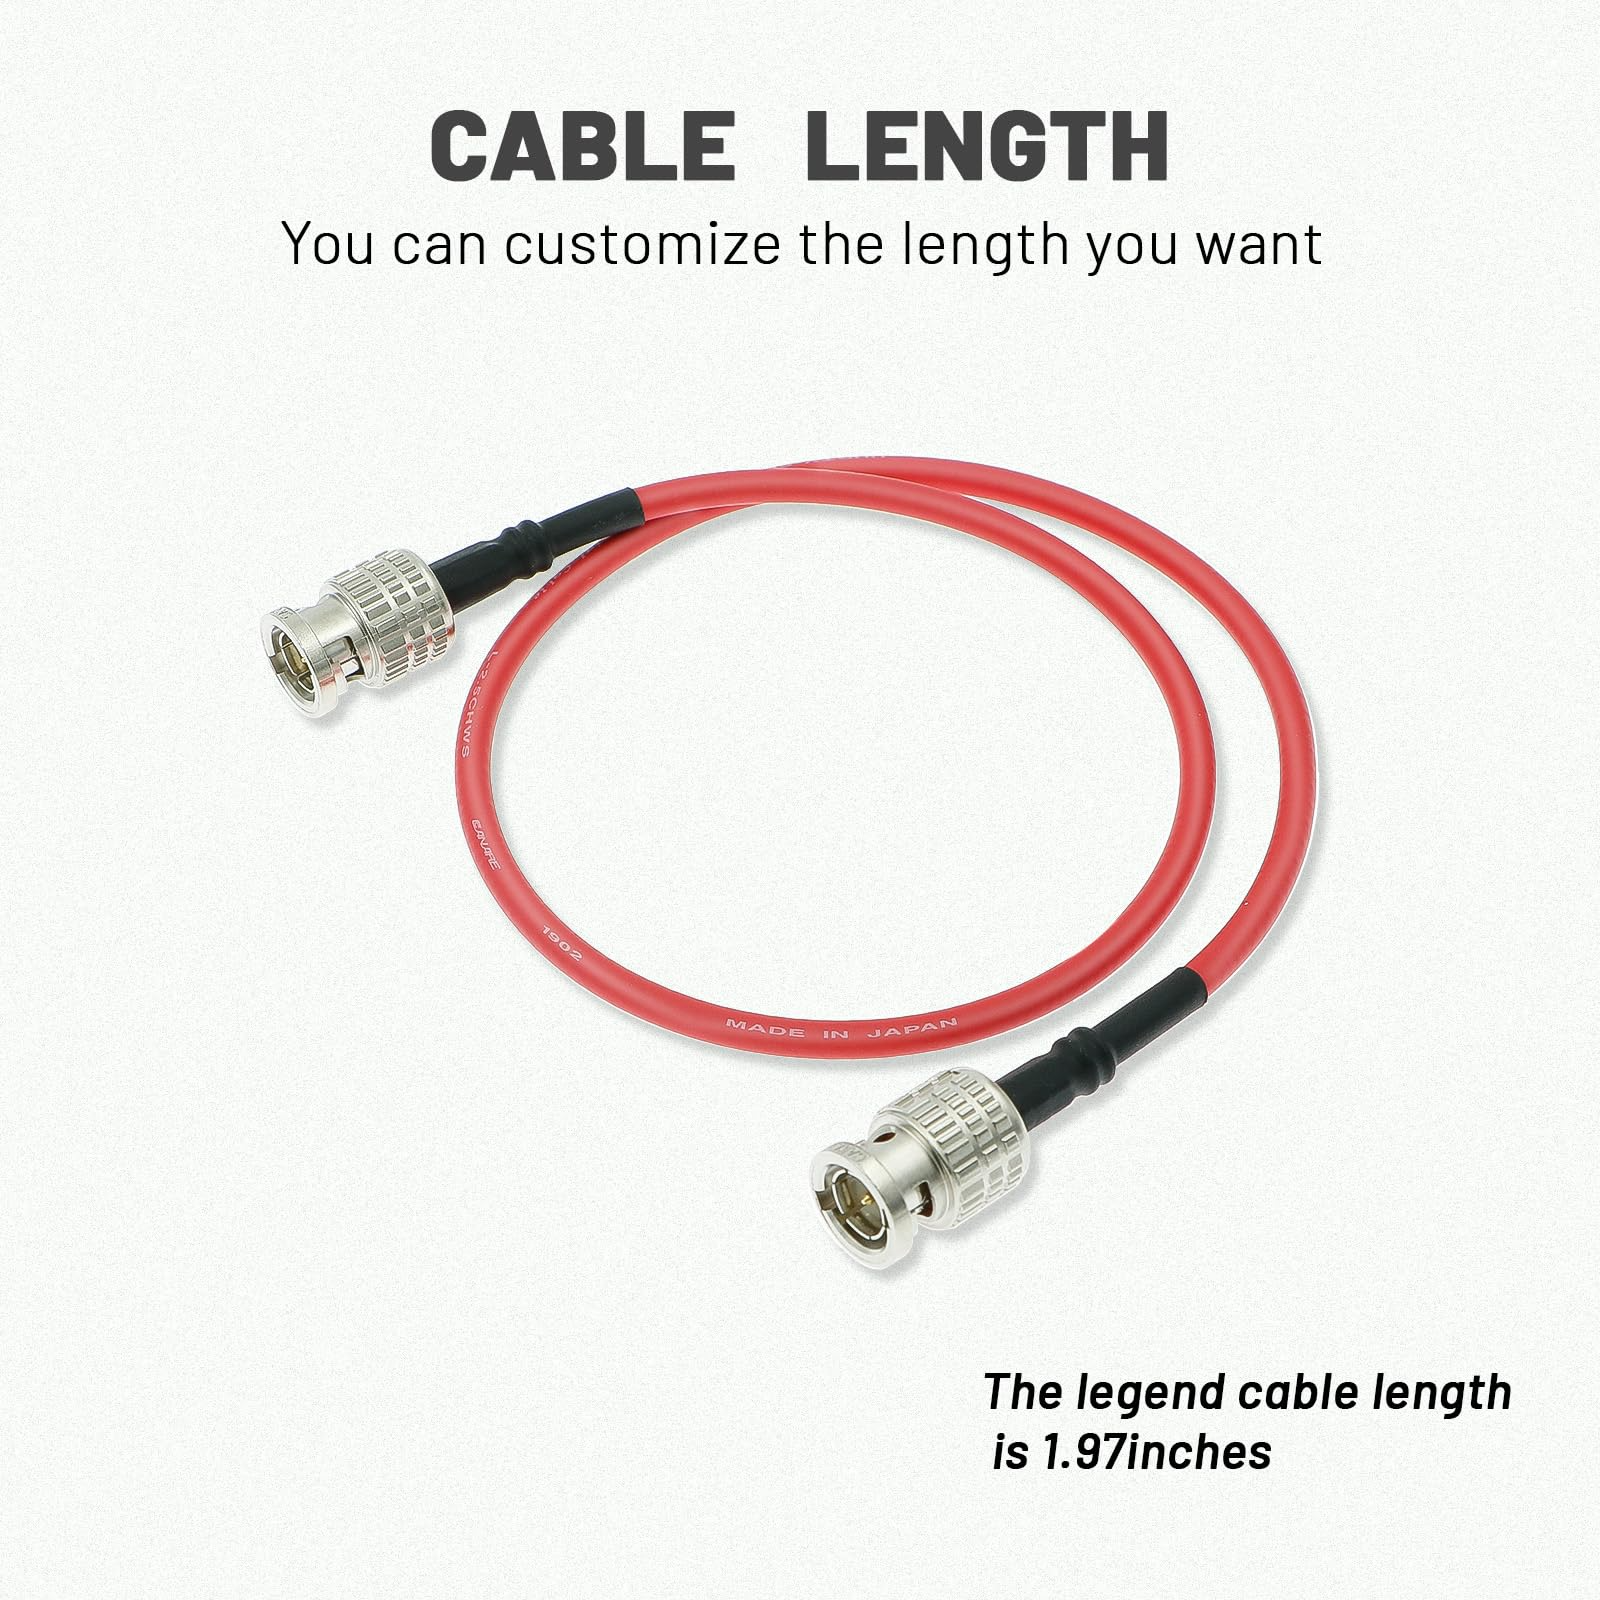 Alvin’s Cables 12G BNC-Cable HD SDI Flexible Shielded Coaxial Cord 75Ohm BNC Male to Male for 4K Video Camera 50CM|19inches